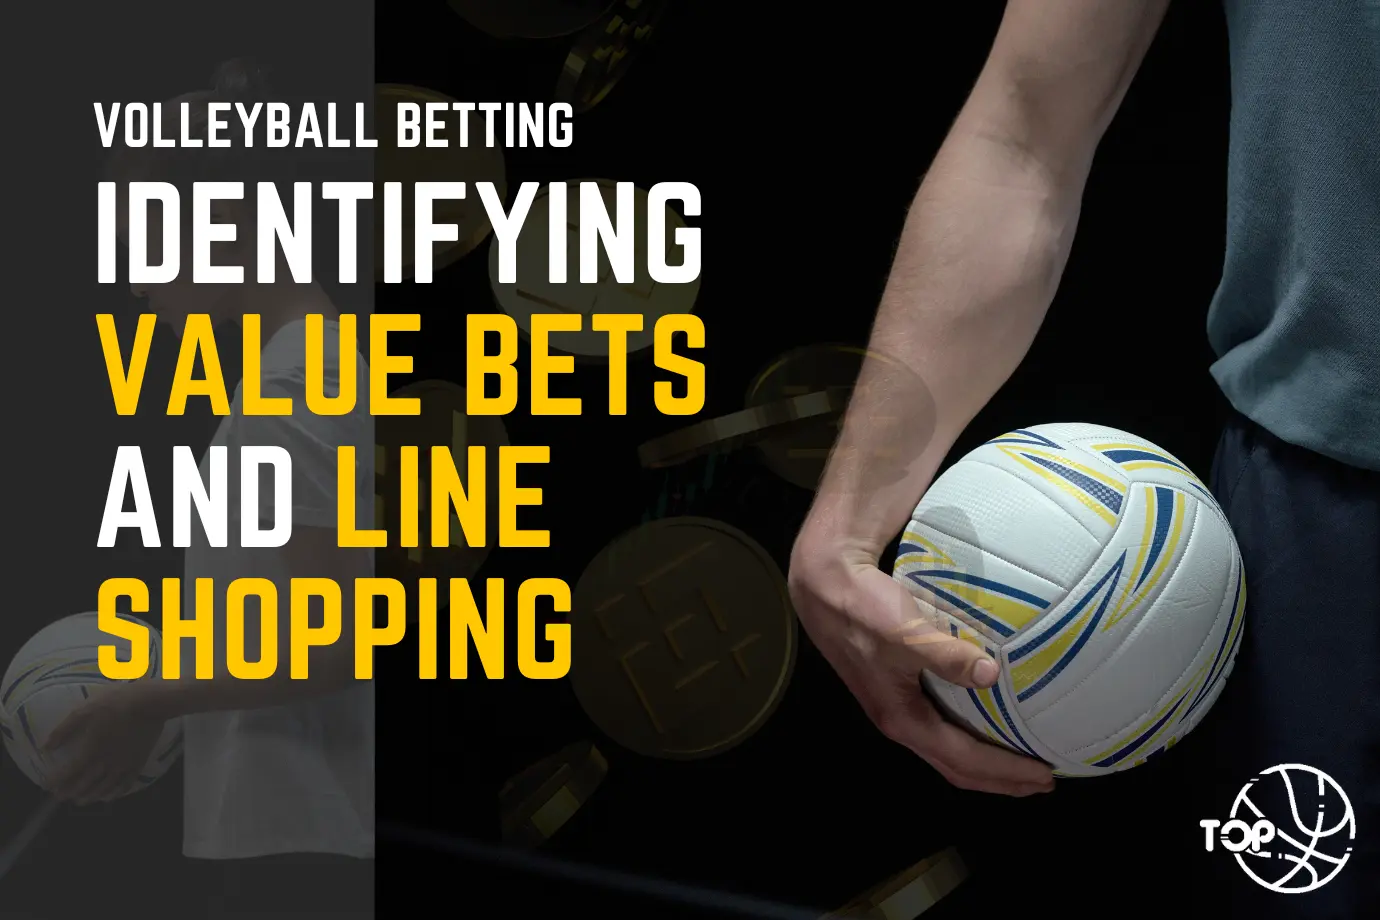 Volleyball Betting: Identifying Value Bets and Line Shopping